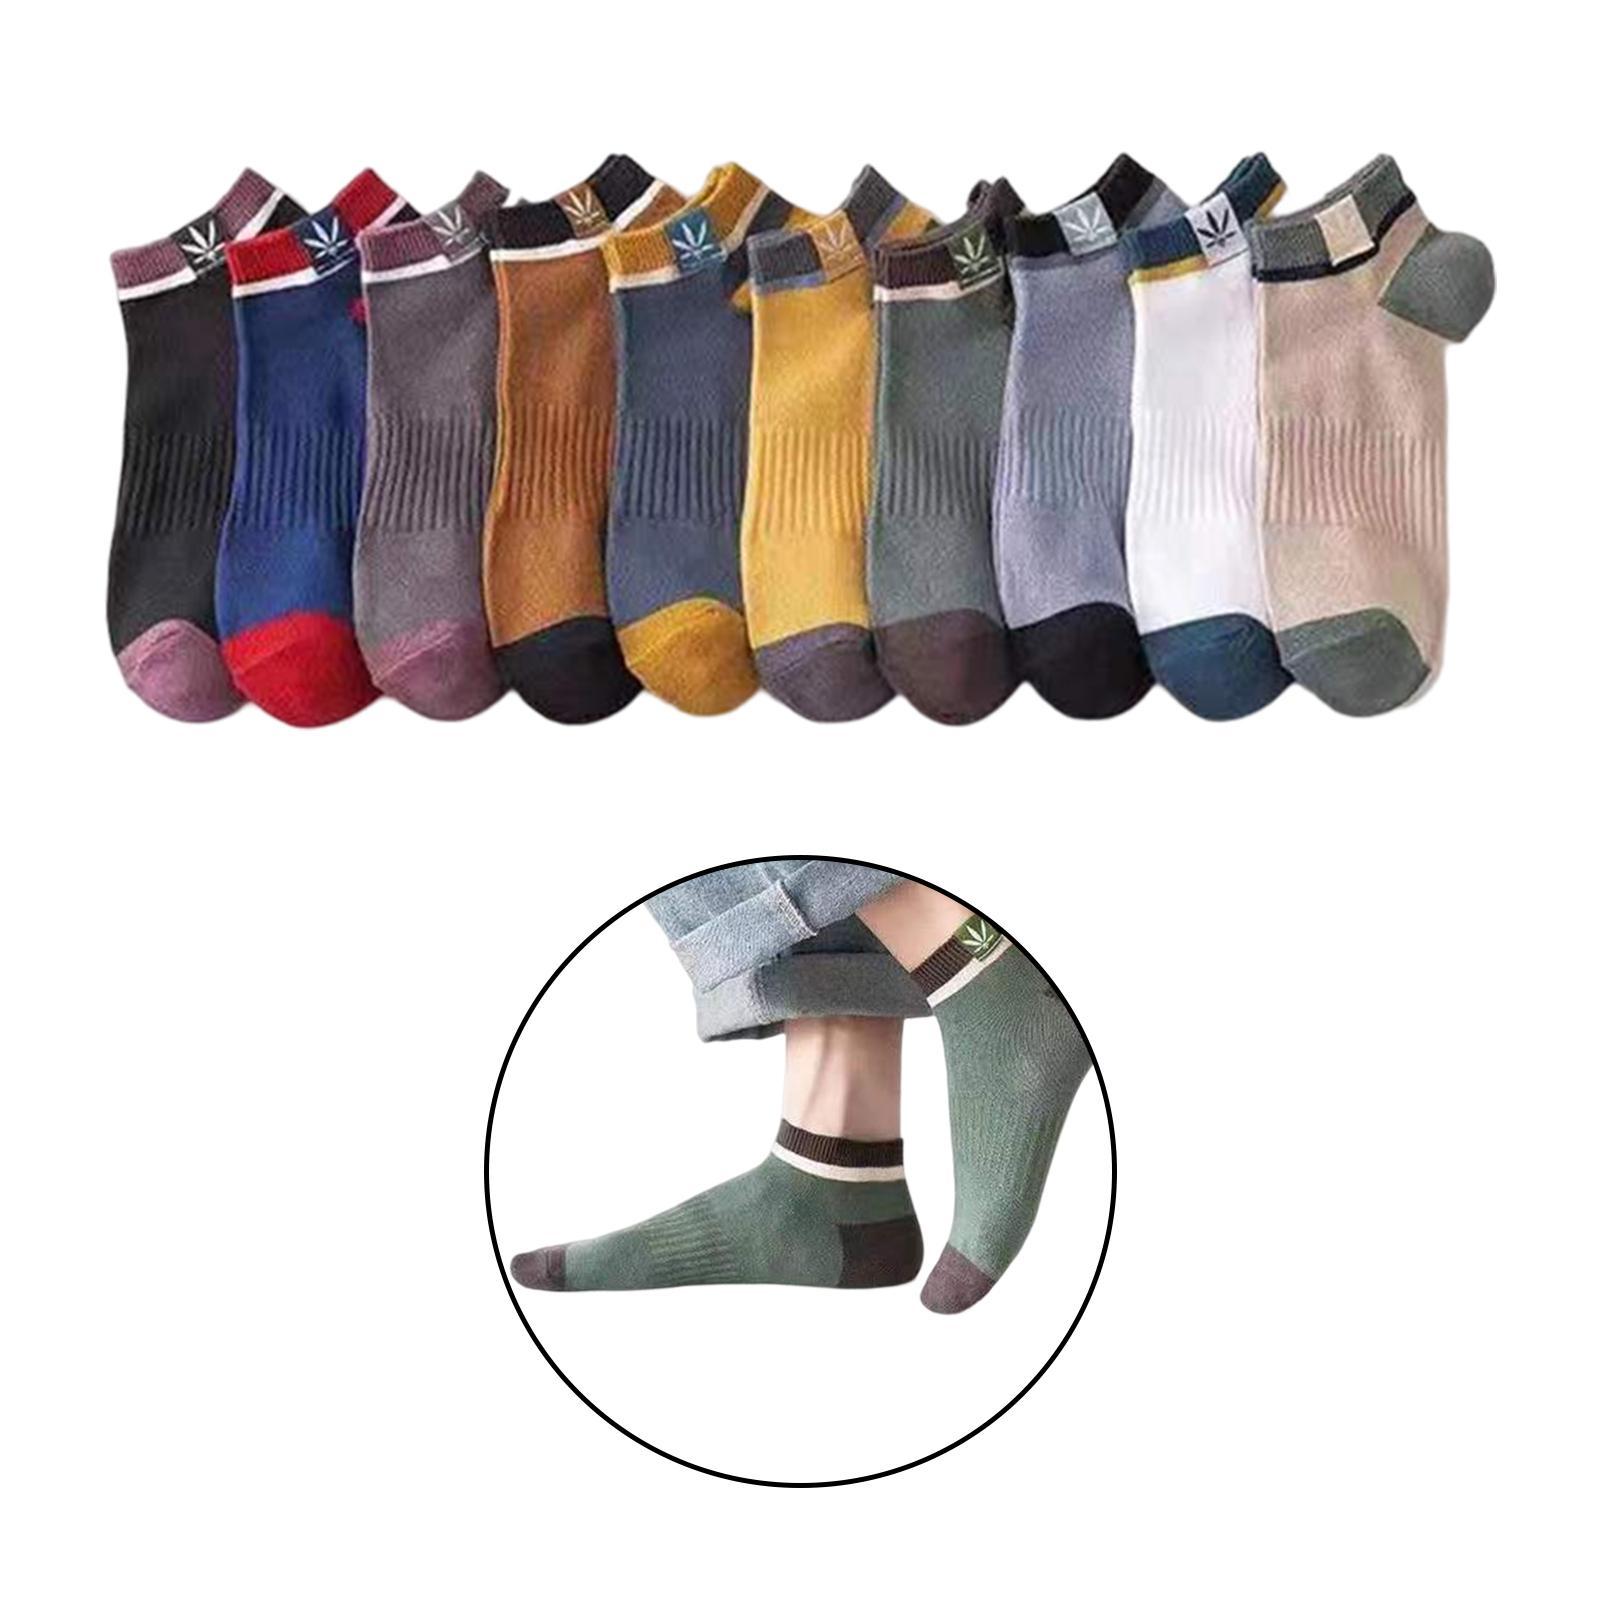 10 Pairs Mens Ankle Socks Low Cut Comfort Sweat Wicking Casual for Running